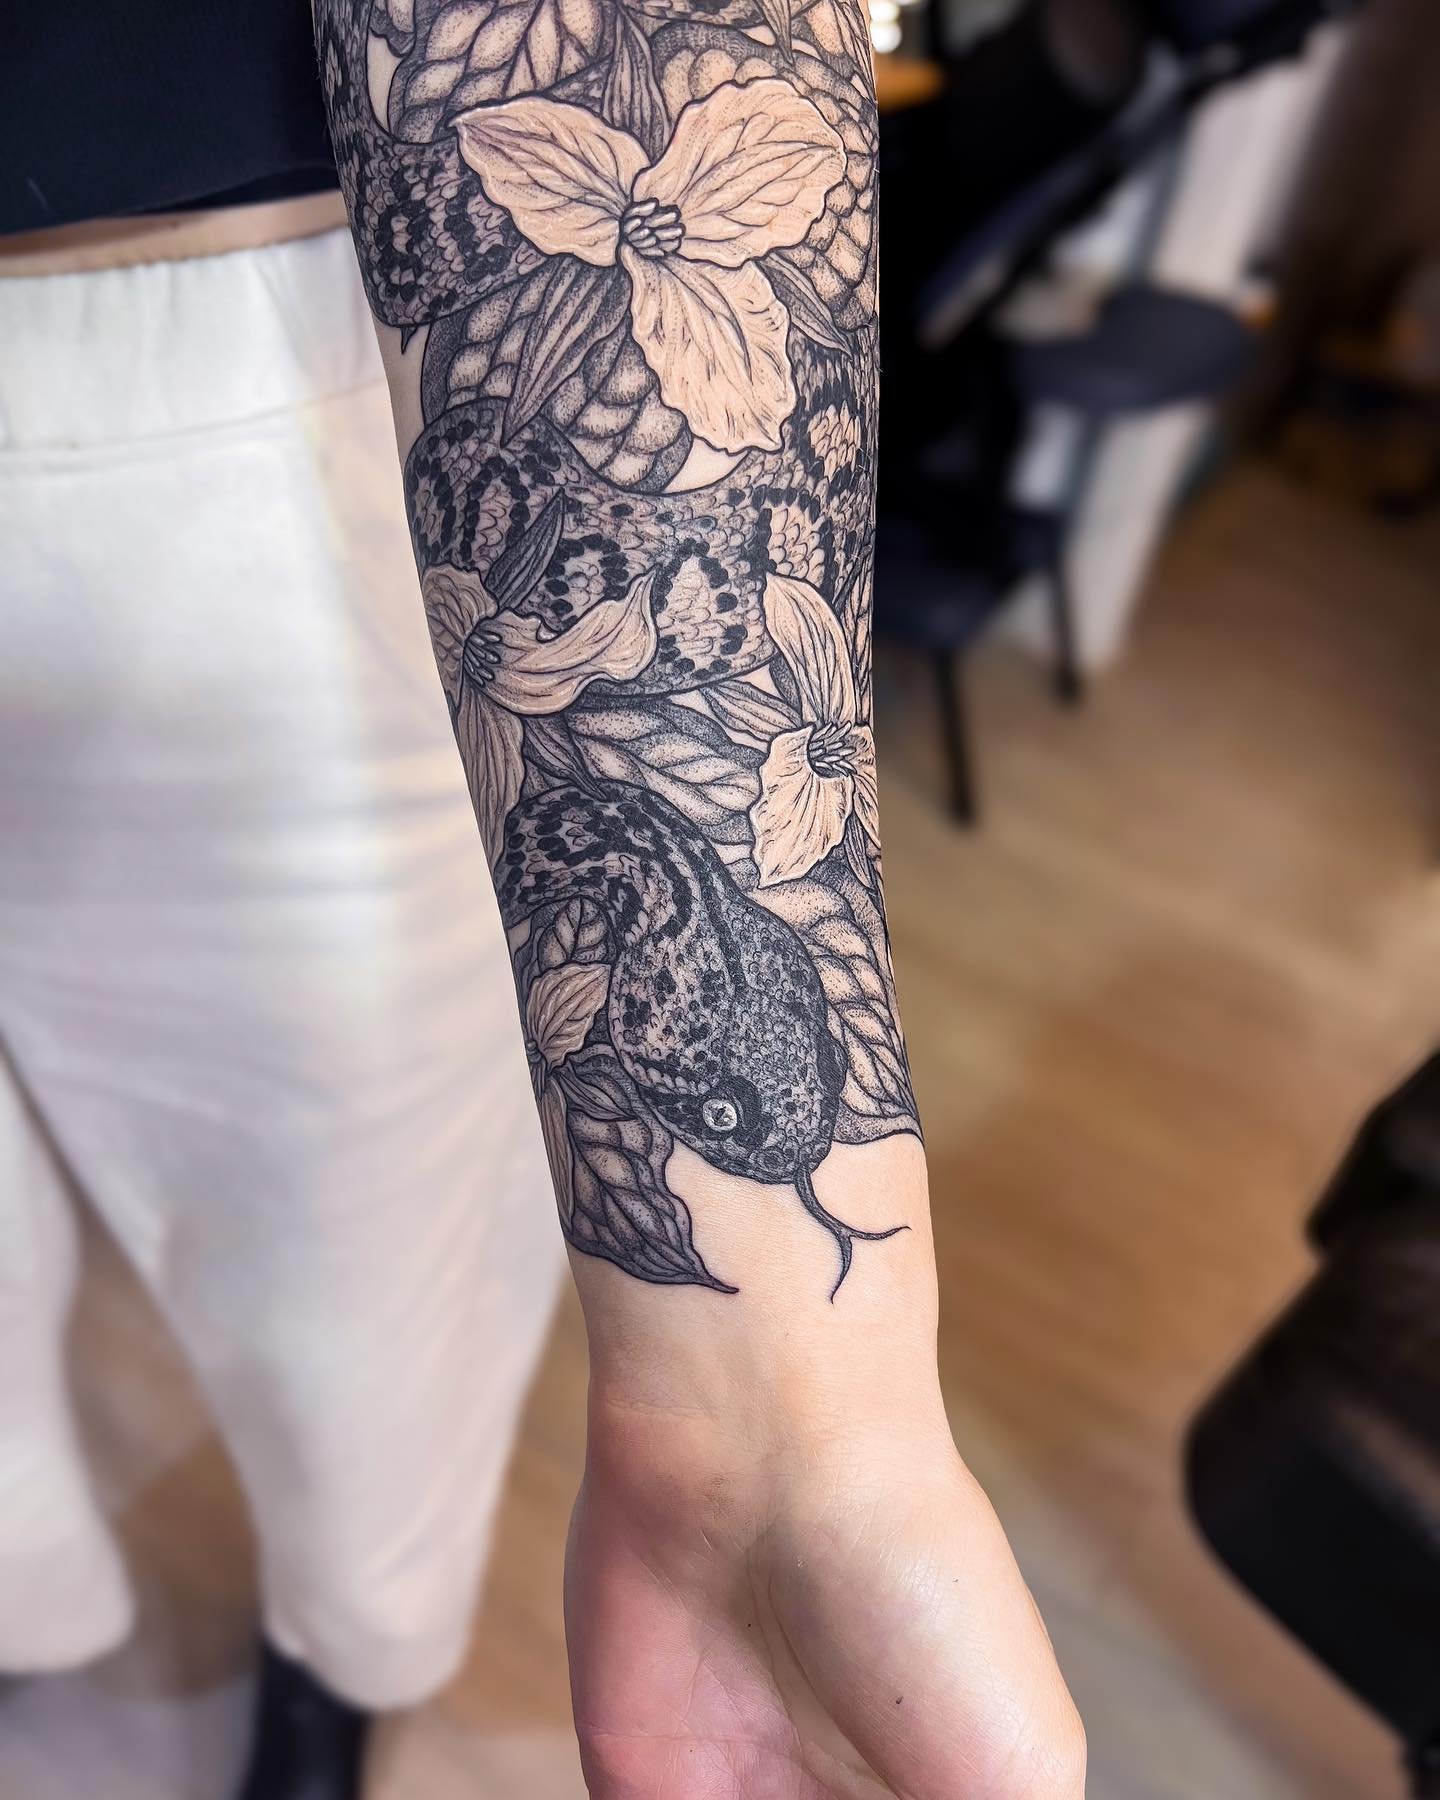 Rattlesnake and trilliums 🌑✨ Super pleased with this one! Single session 5.5 hrs.